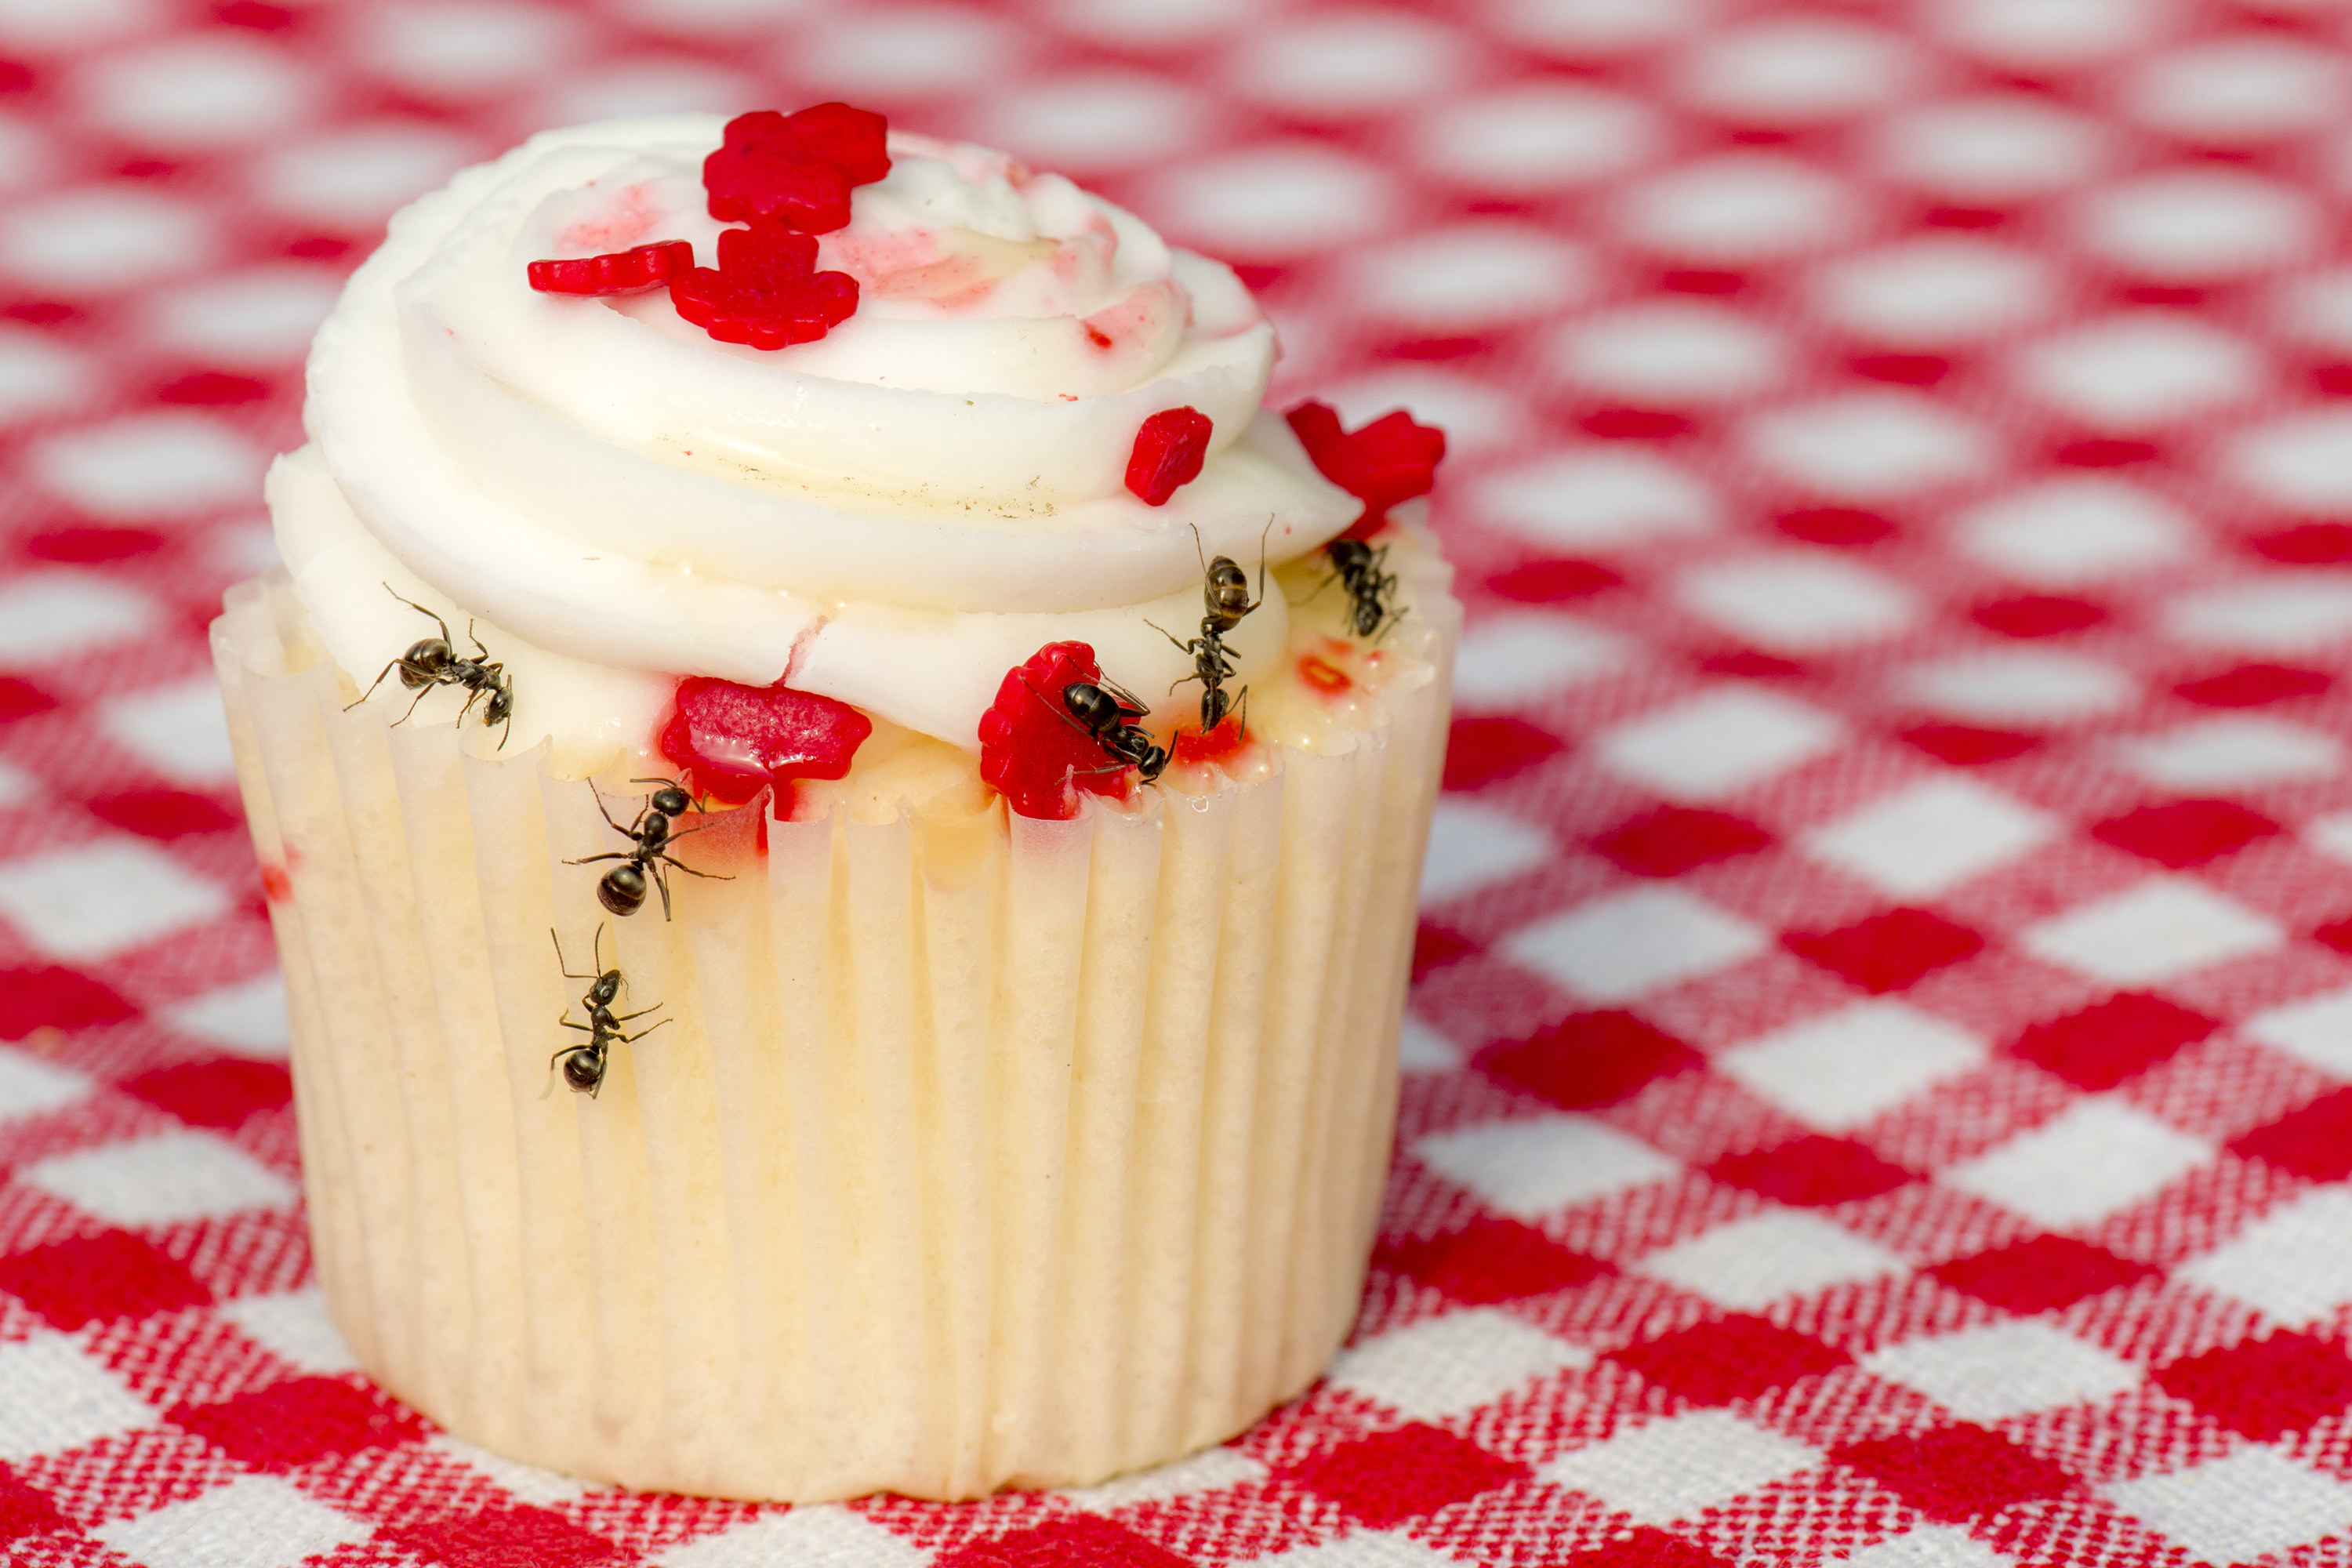 Closeup of several ants on a cupcake